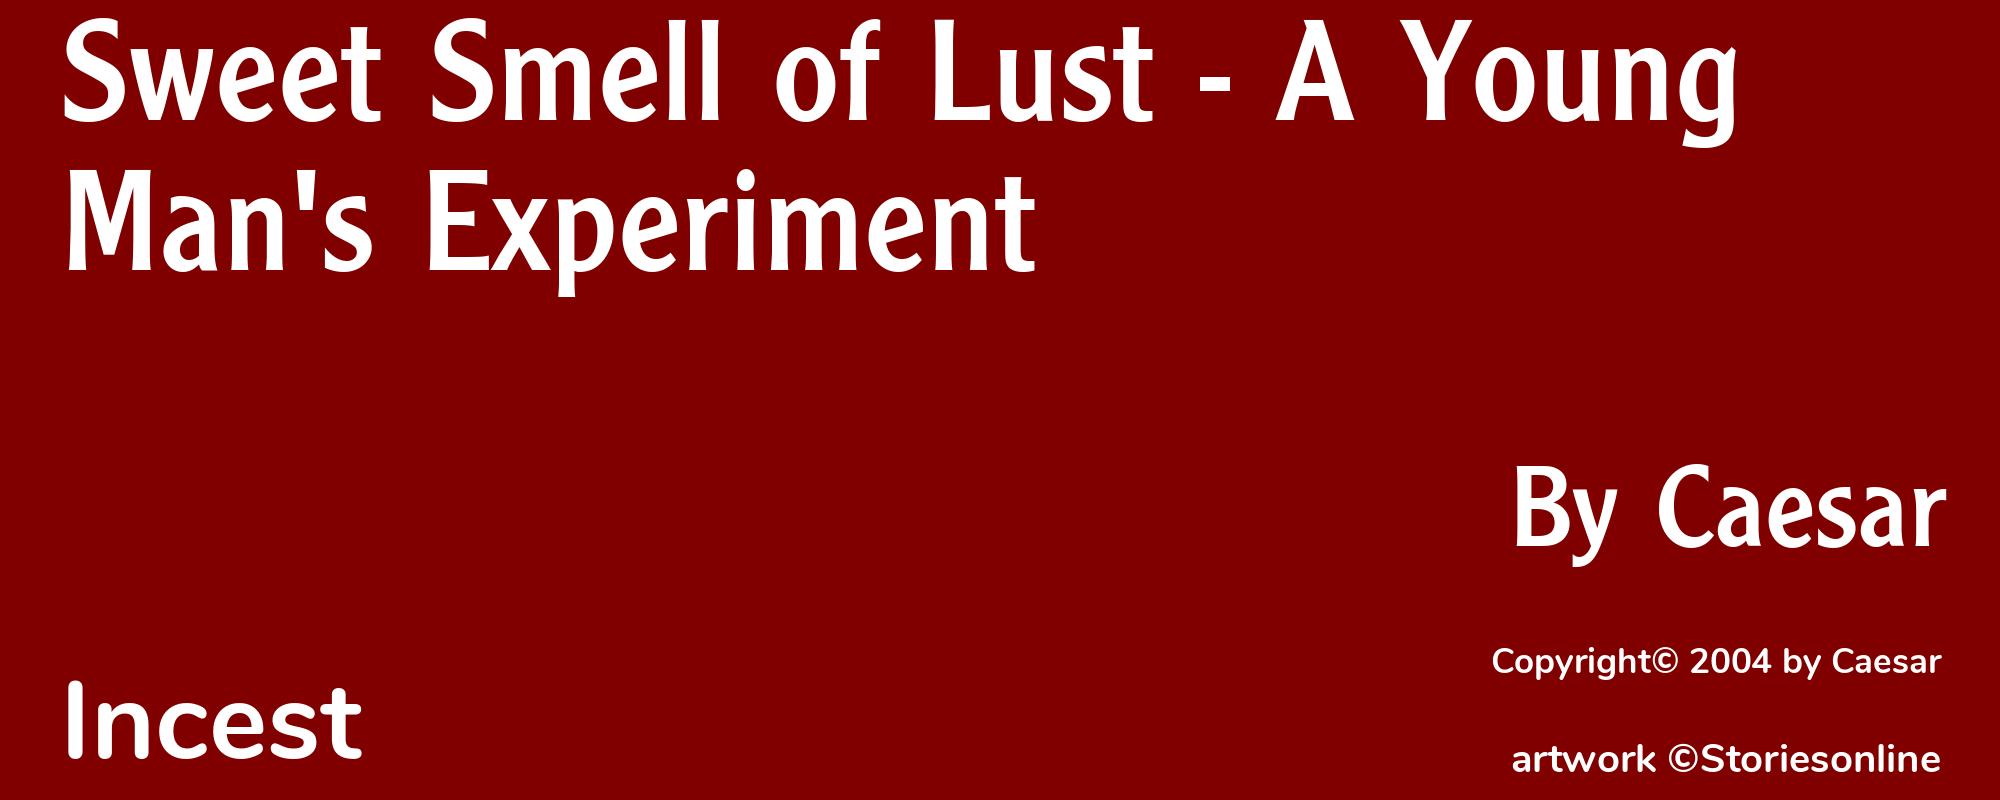 Sweet Smell of Lust - A Young Man's Experiment - Cover